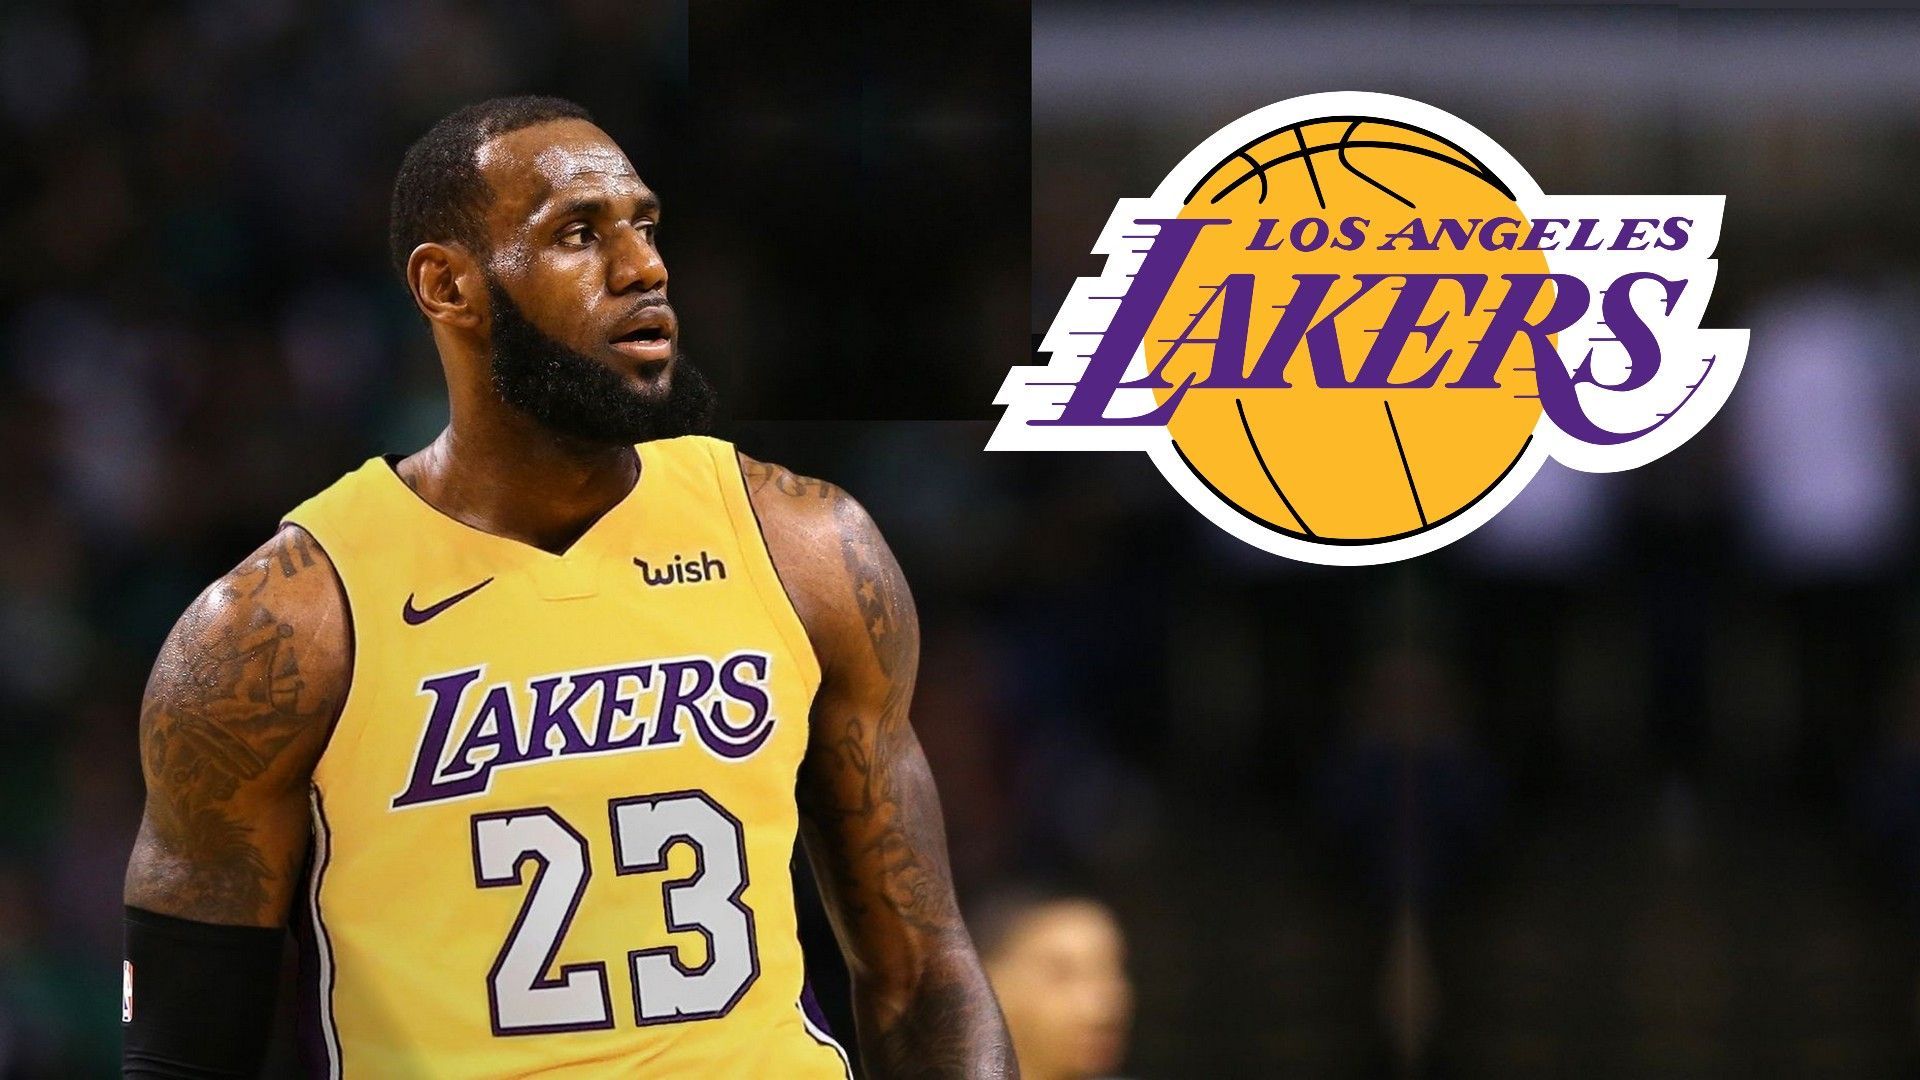 LeBron James Lakers Jersey Desktop Wallpaper is the perfect High Quality NBA basketball wallpaper with HD Resolution.. Lebron james lakers, Lebron james, Lakers